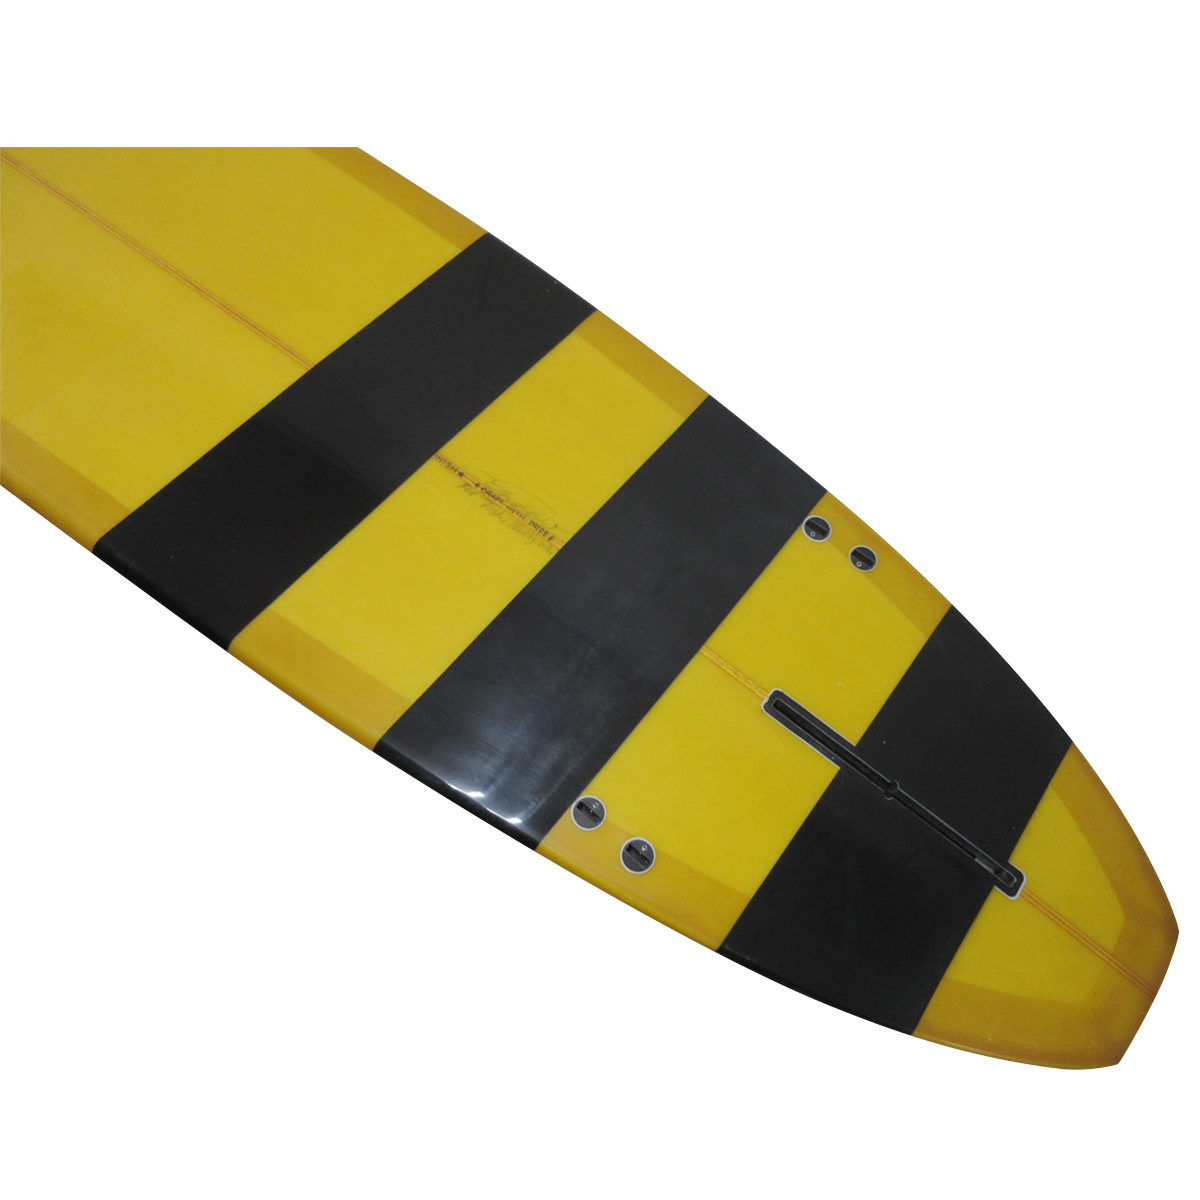 ENO Surfboards / All Round 9'0